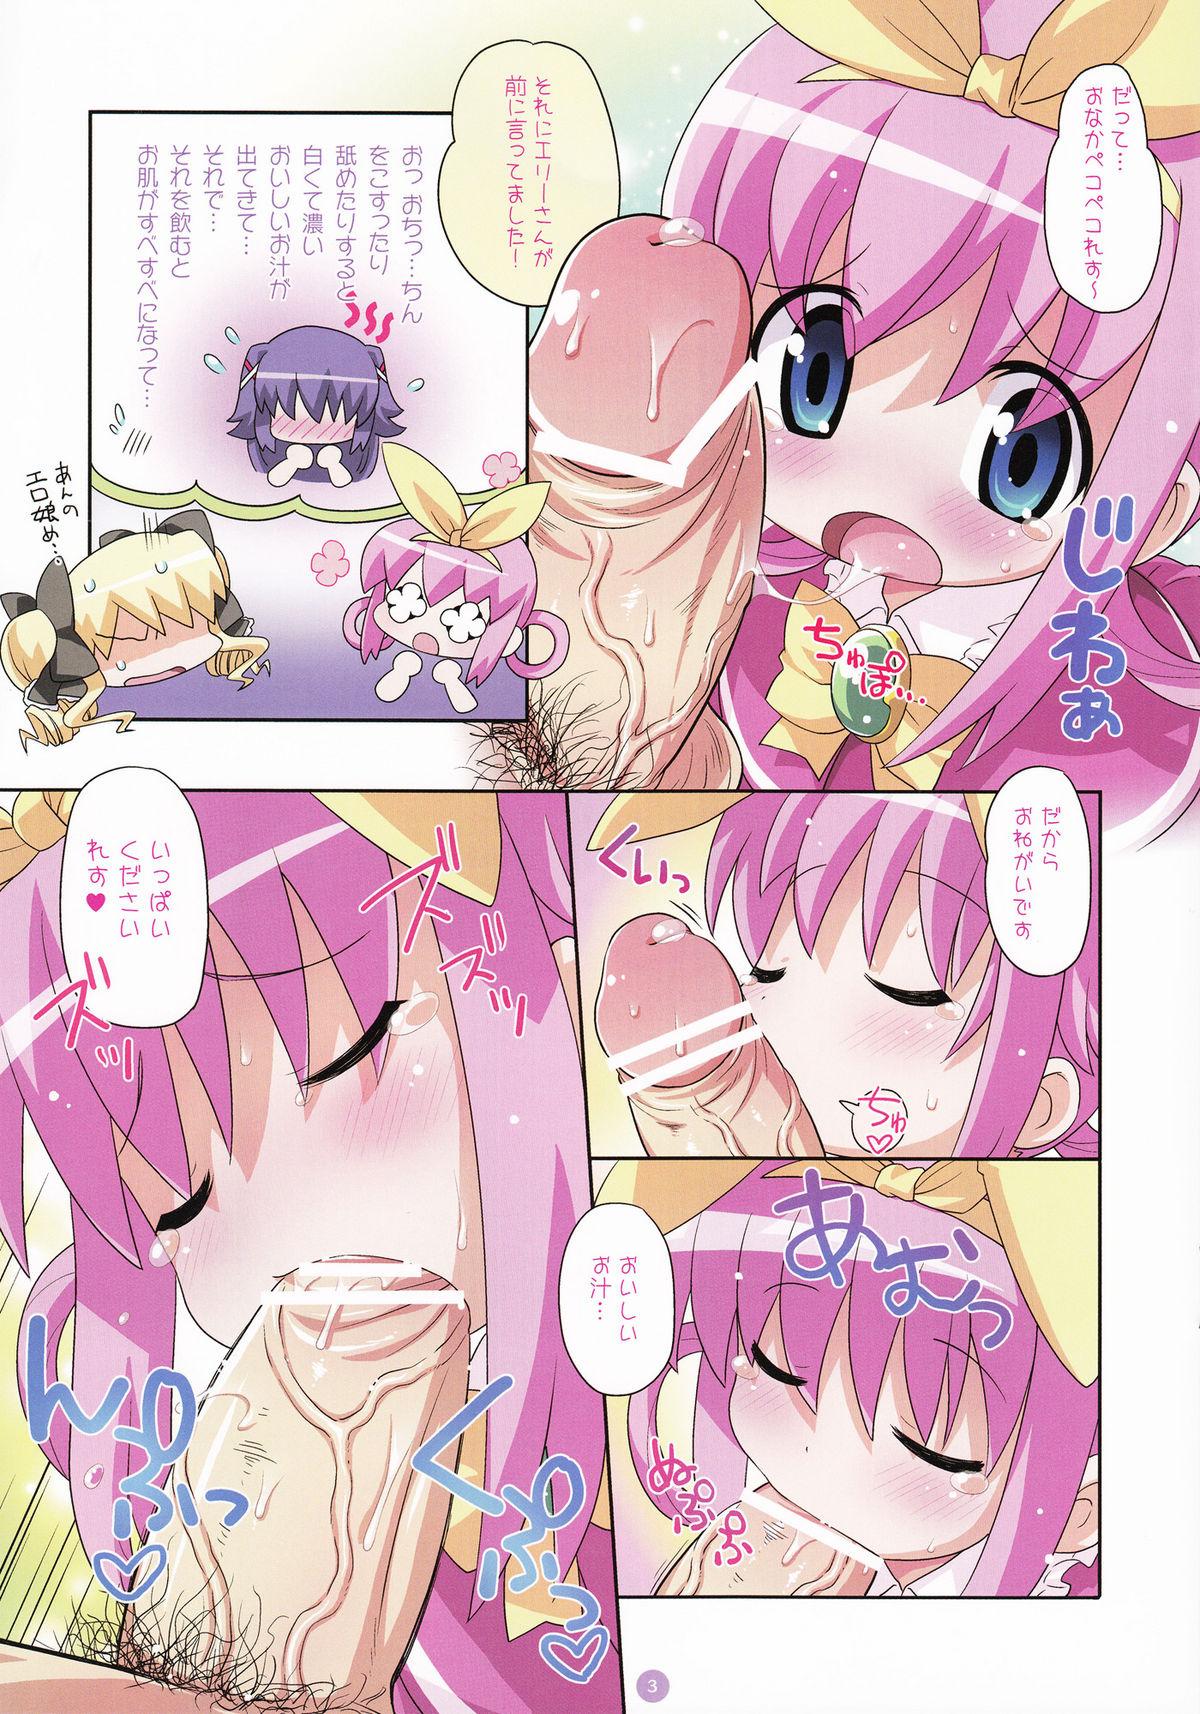 Best Blowjobs Ever Himitsu no Opera Part - Tantei opera milky holmes Roleplay - Page 3